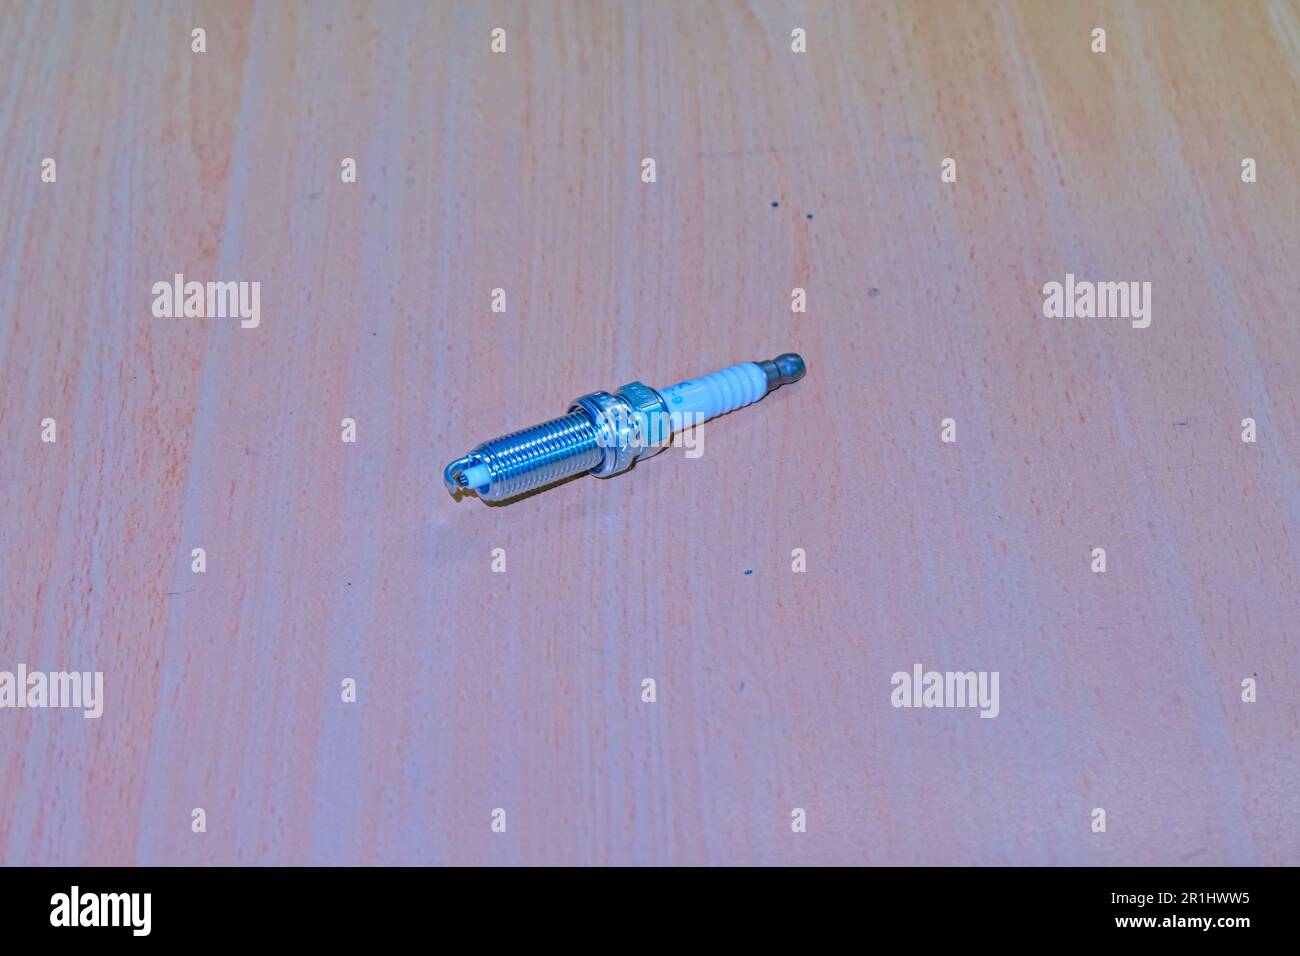 Close up of platinum spark plugs on a wooden table Stock Photo